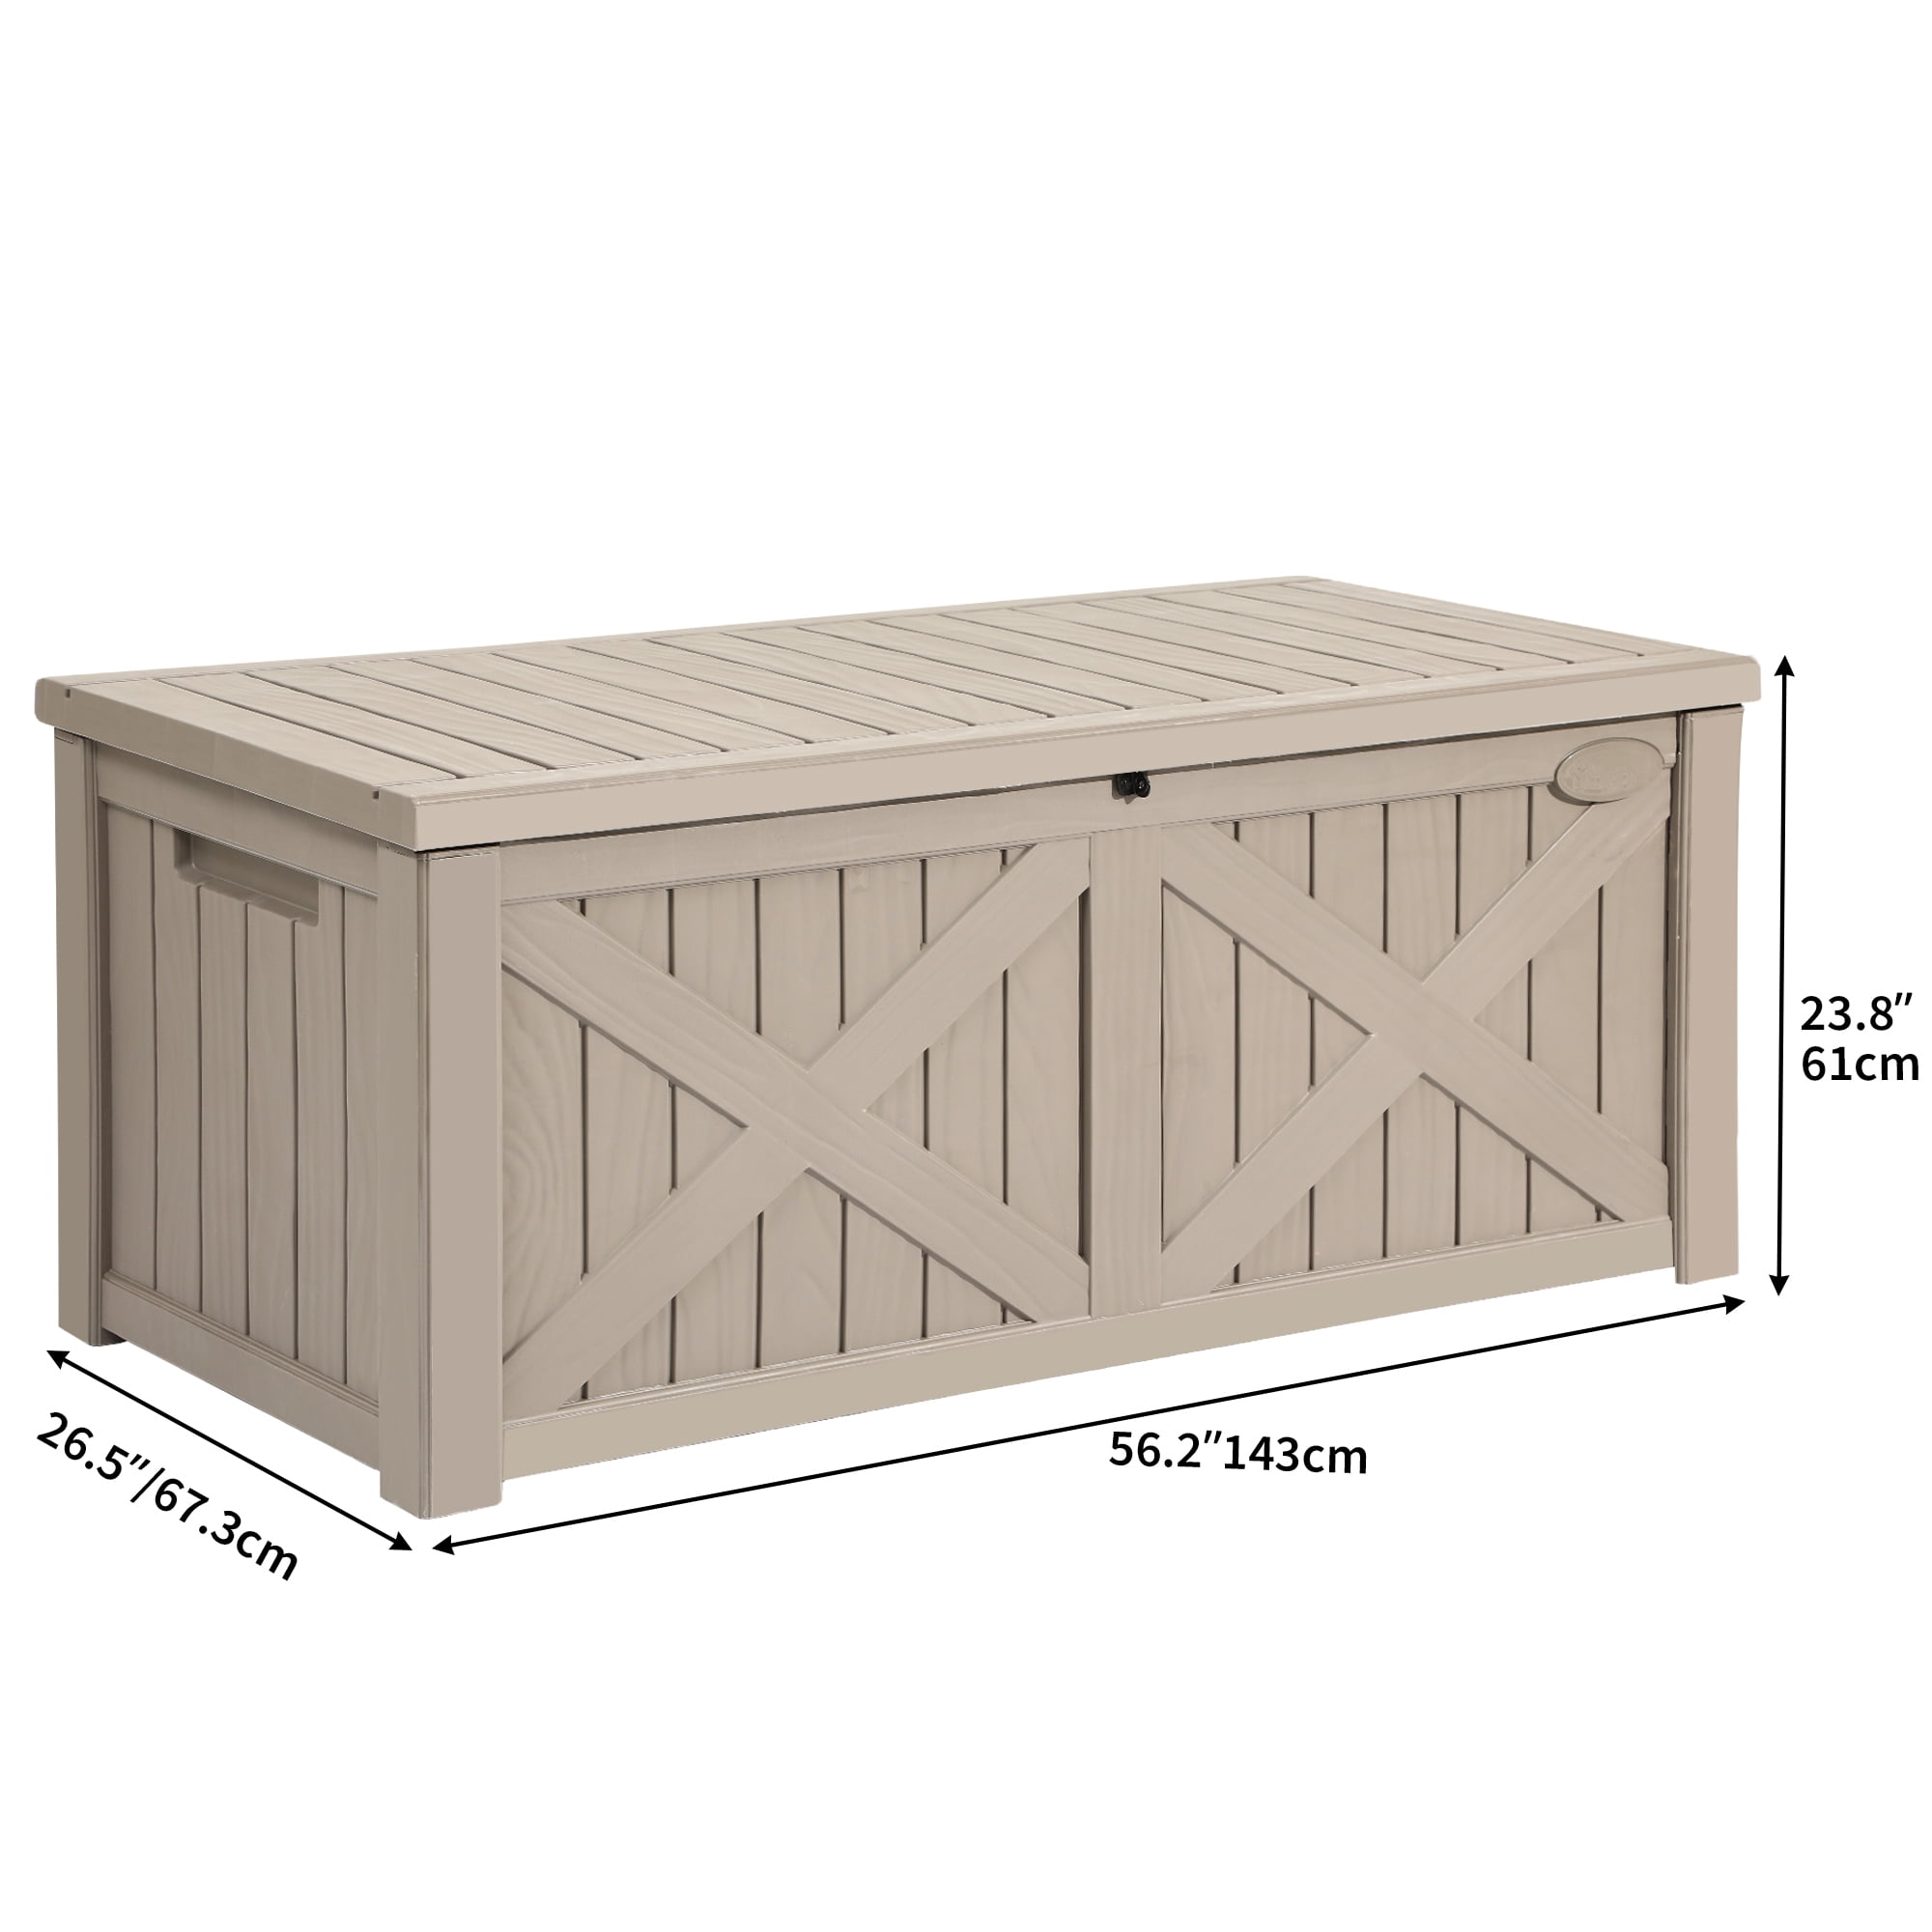 SereneLifeHome 120-Gallon Deck Storage Box - Waterproof Outdoor Large  Resin,Garden Tools, Patio Furniture & Sports Equipment, Water-resistant